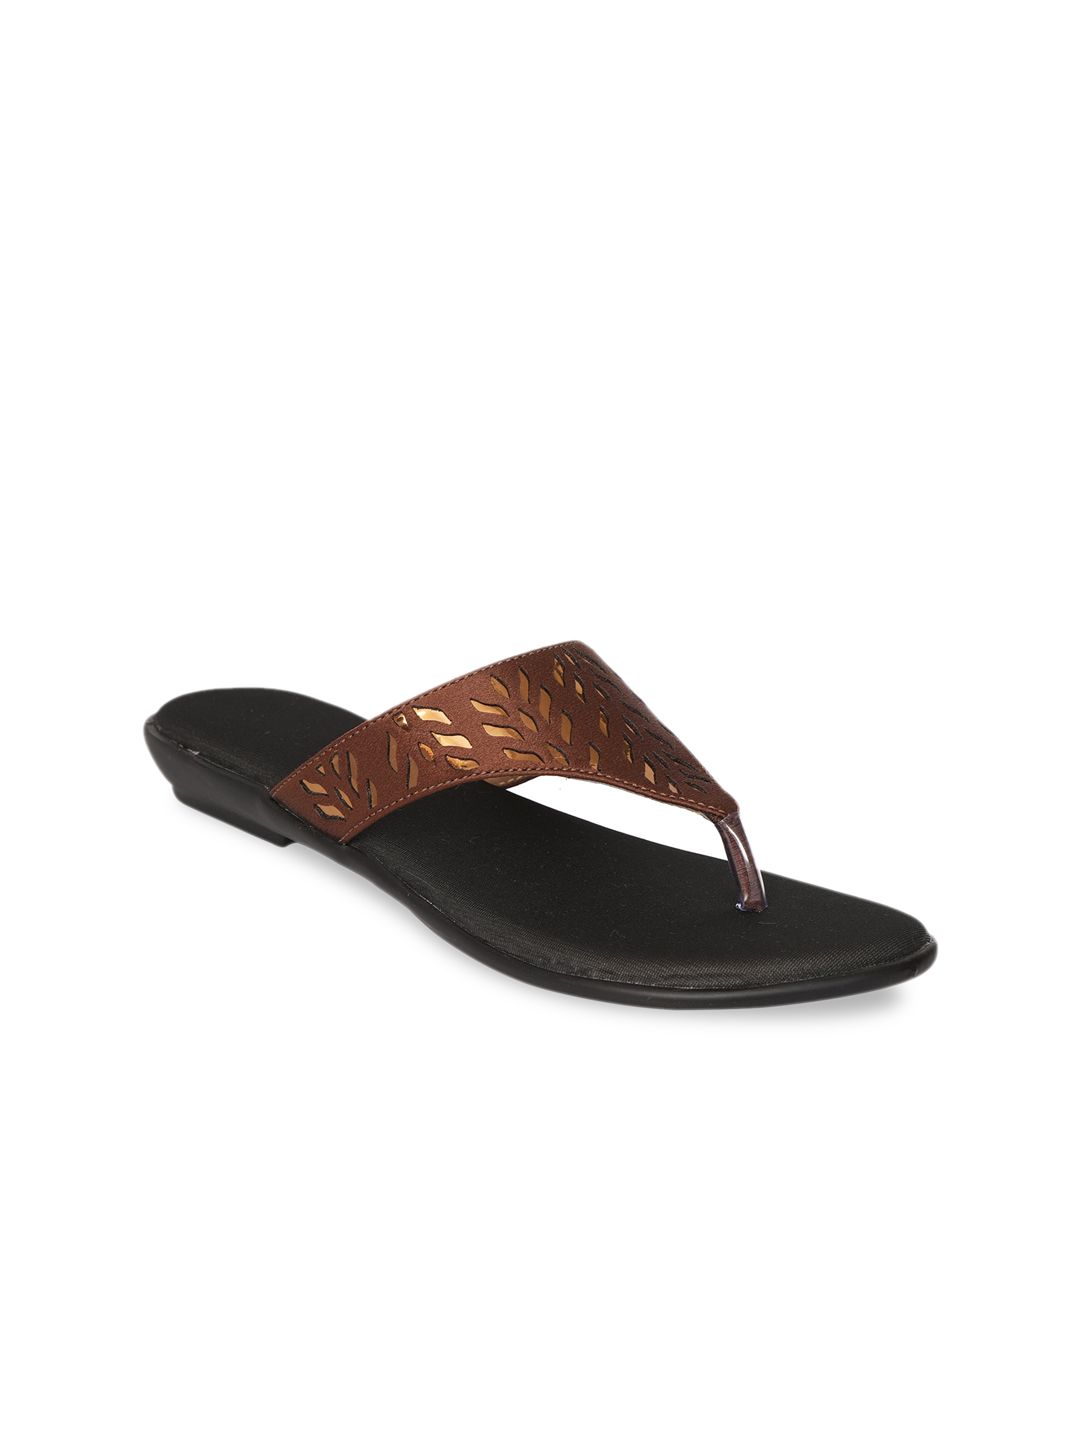 Zyla Women Brown Textured T-Strap Flats Price in India